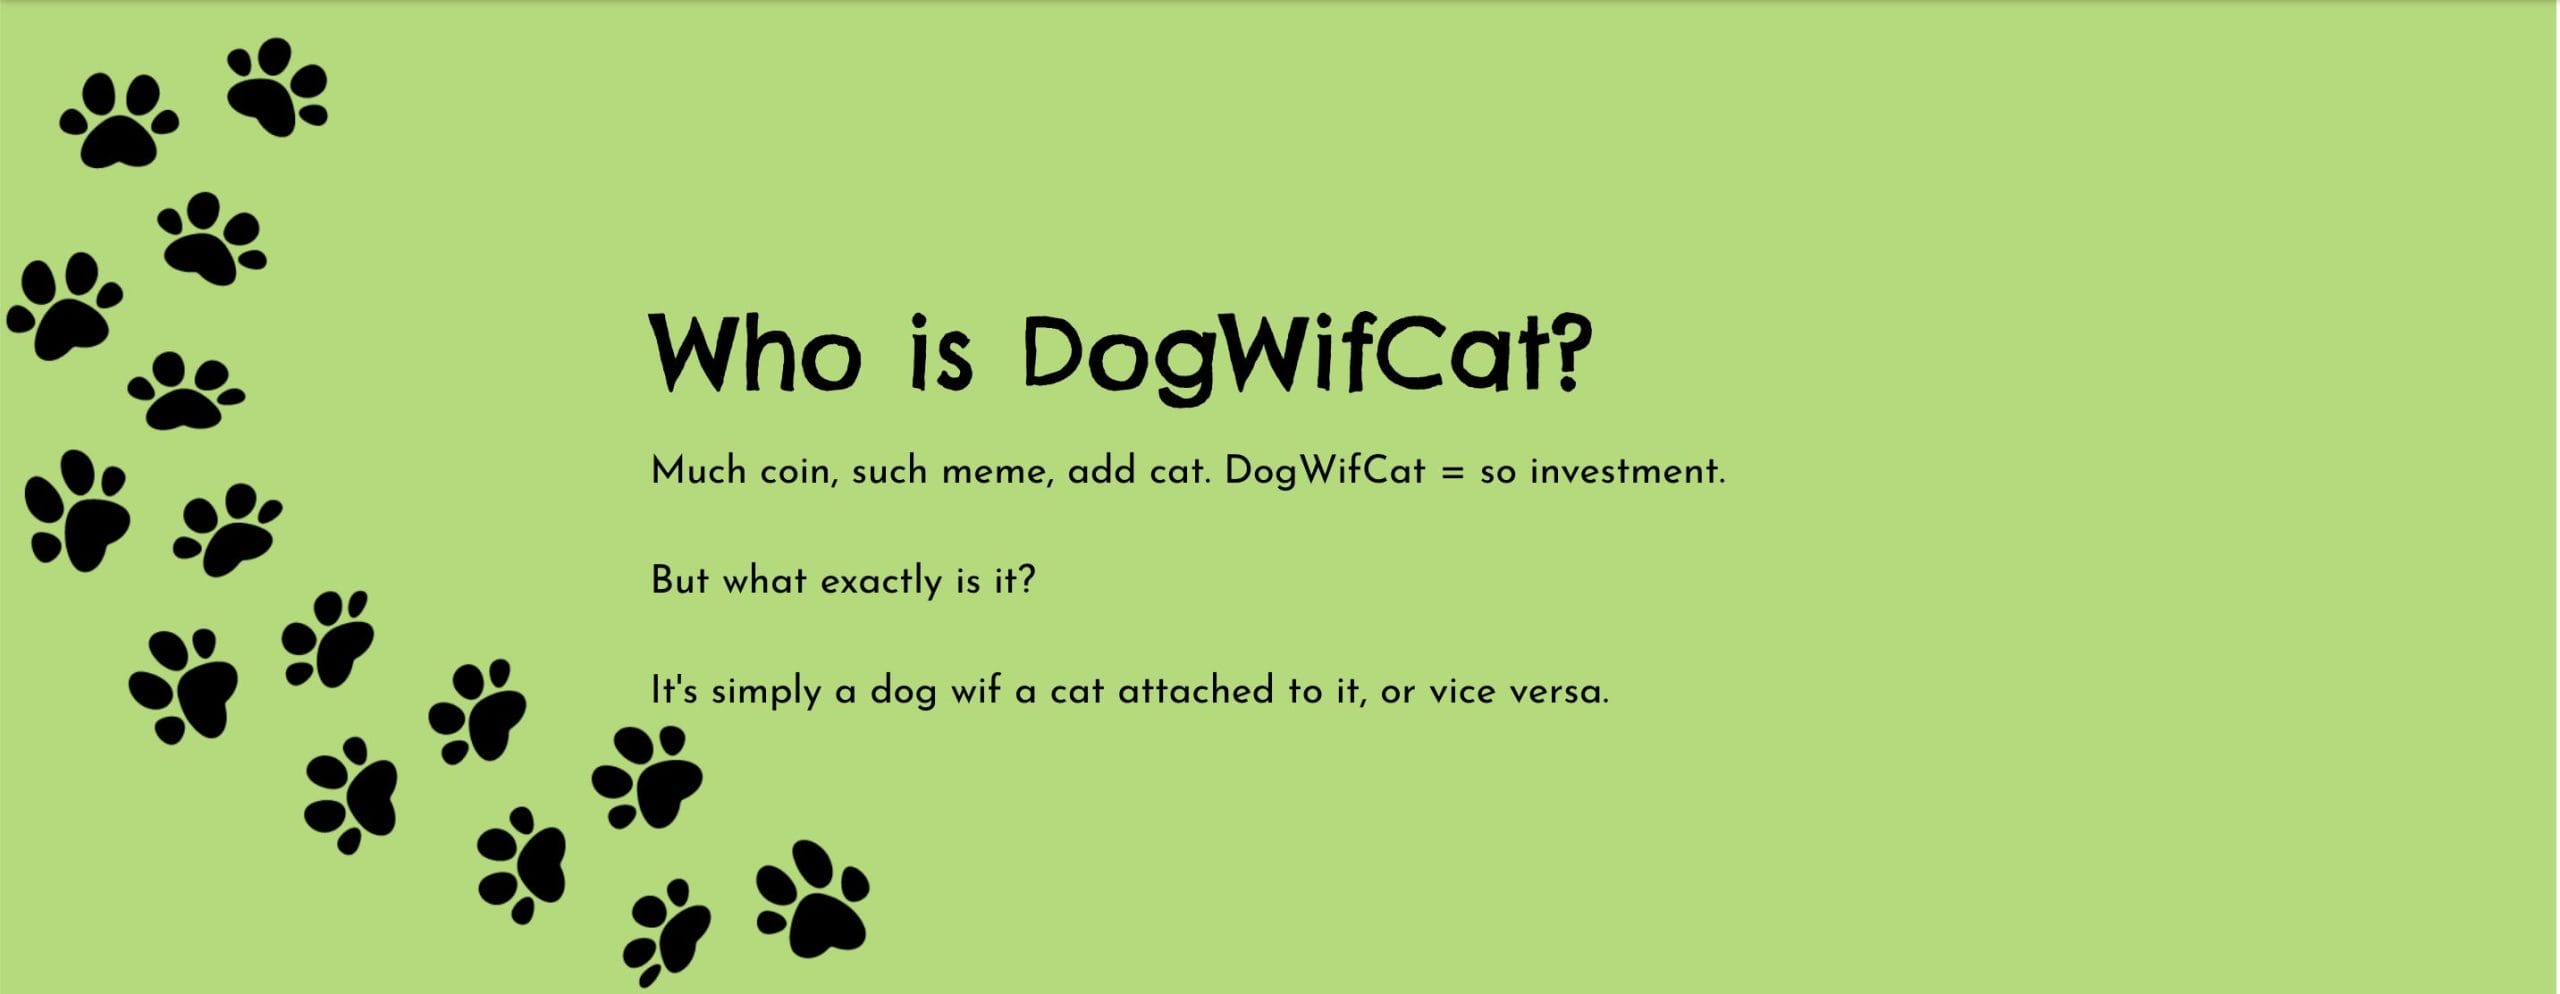 What is DogWifCat?